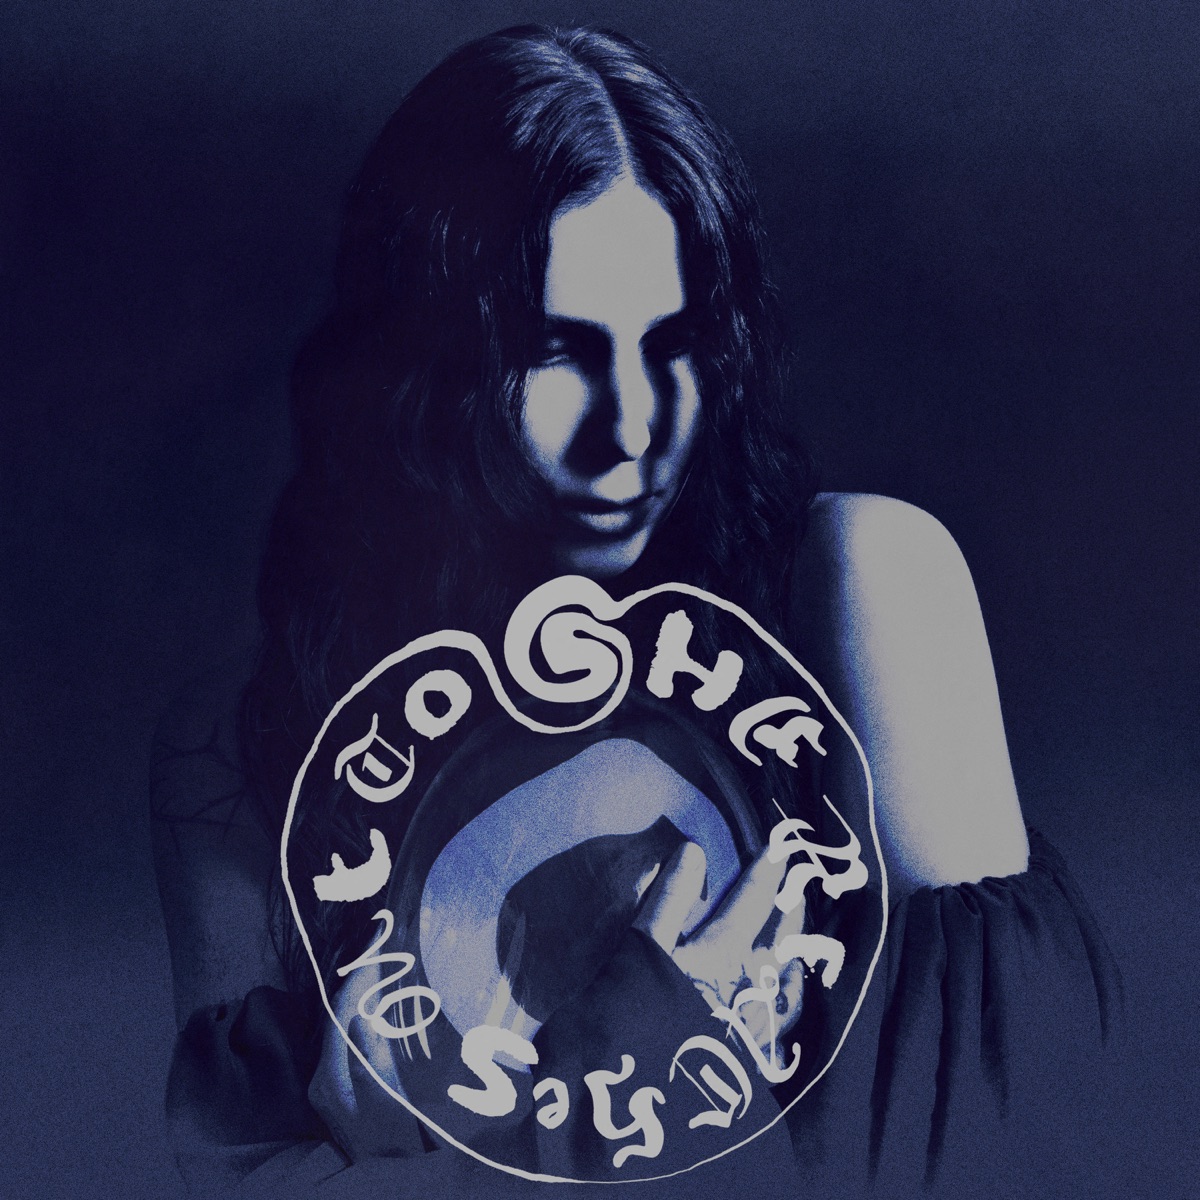 MP3: Chelsea Wolfe – Whispers In The Echo Chamber Latest Songs